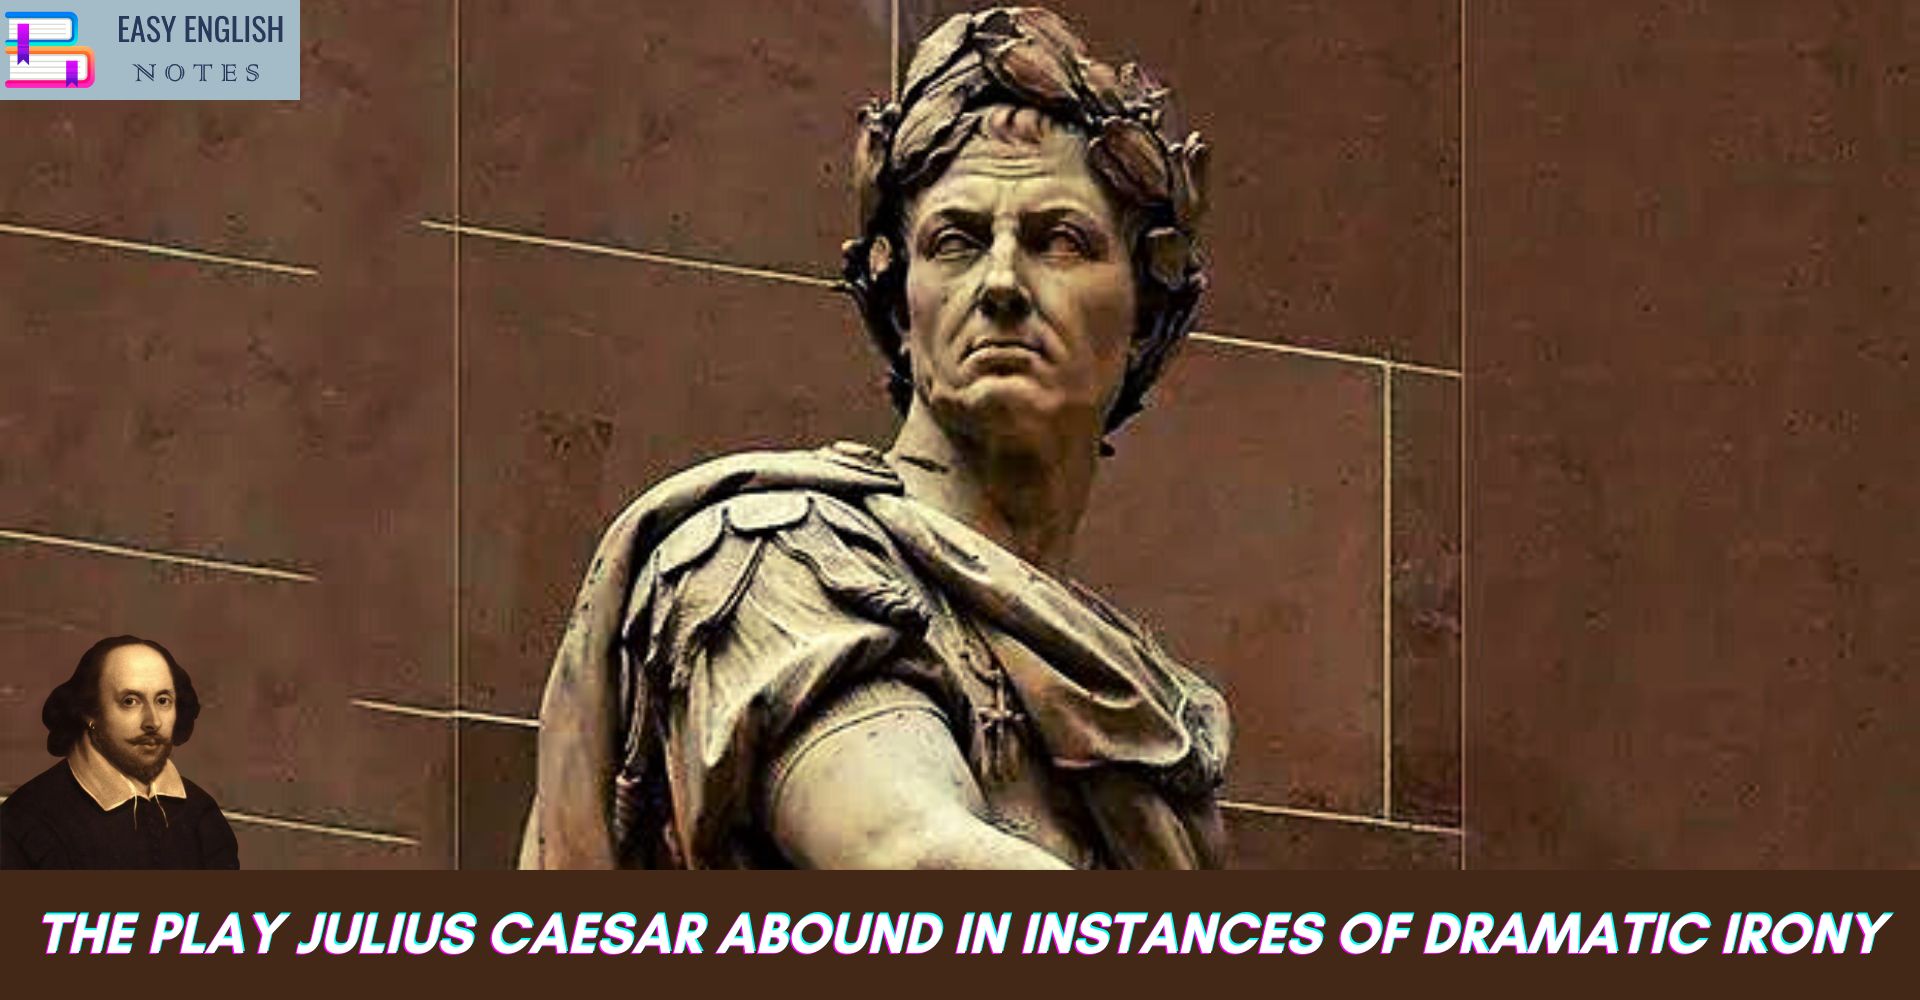 The play Julius Caesar abound in instances of Dramatic Irony